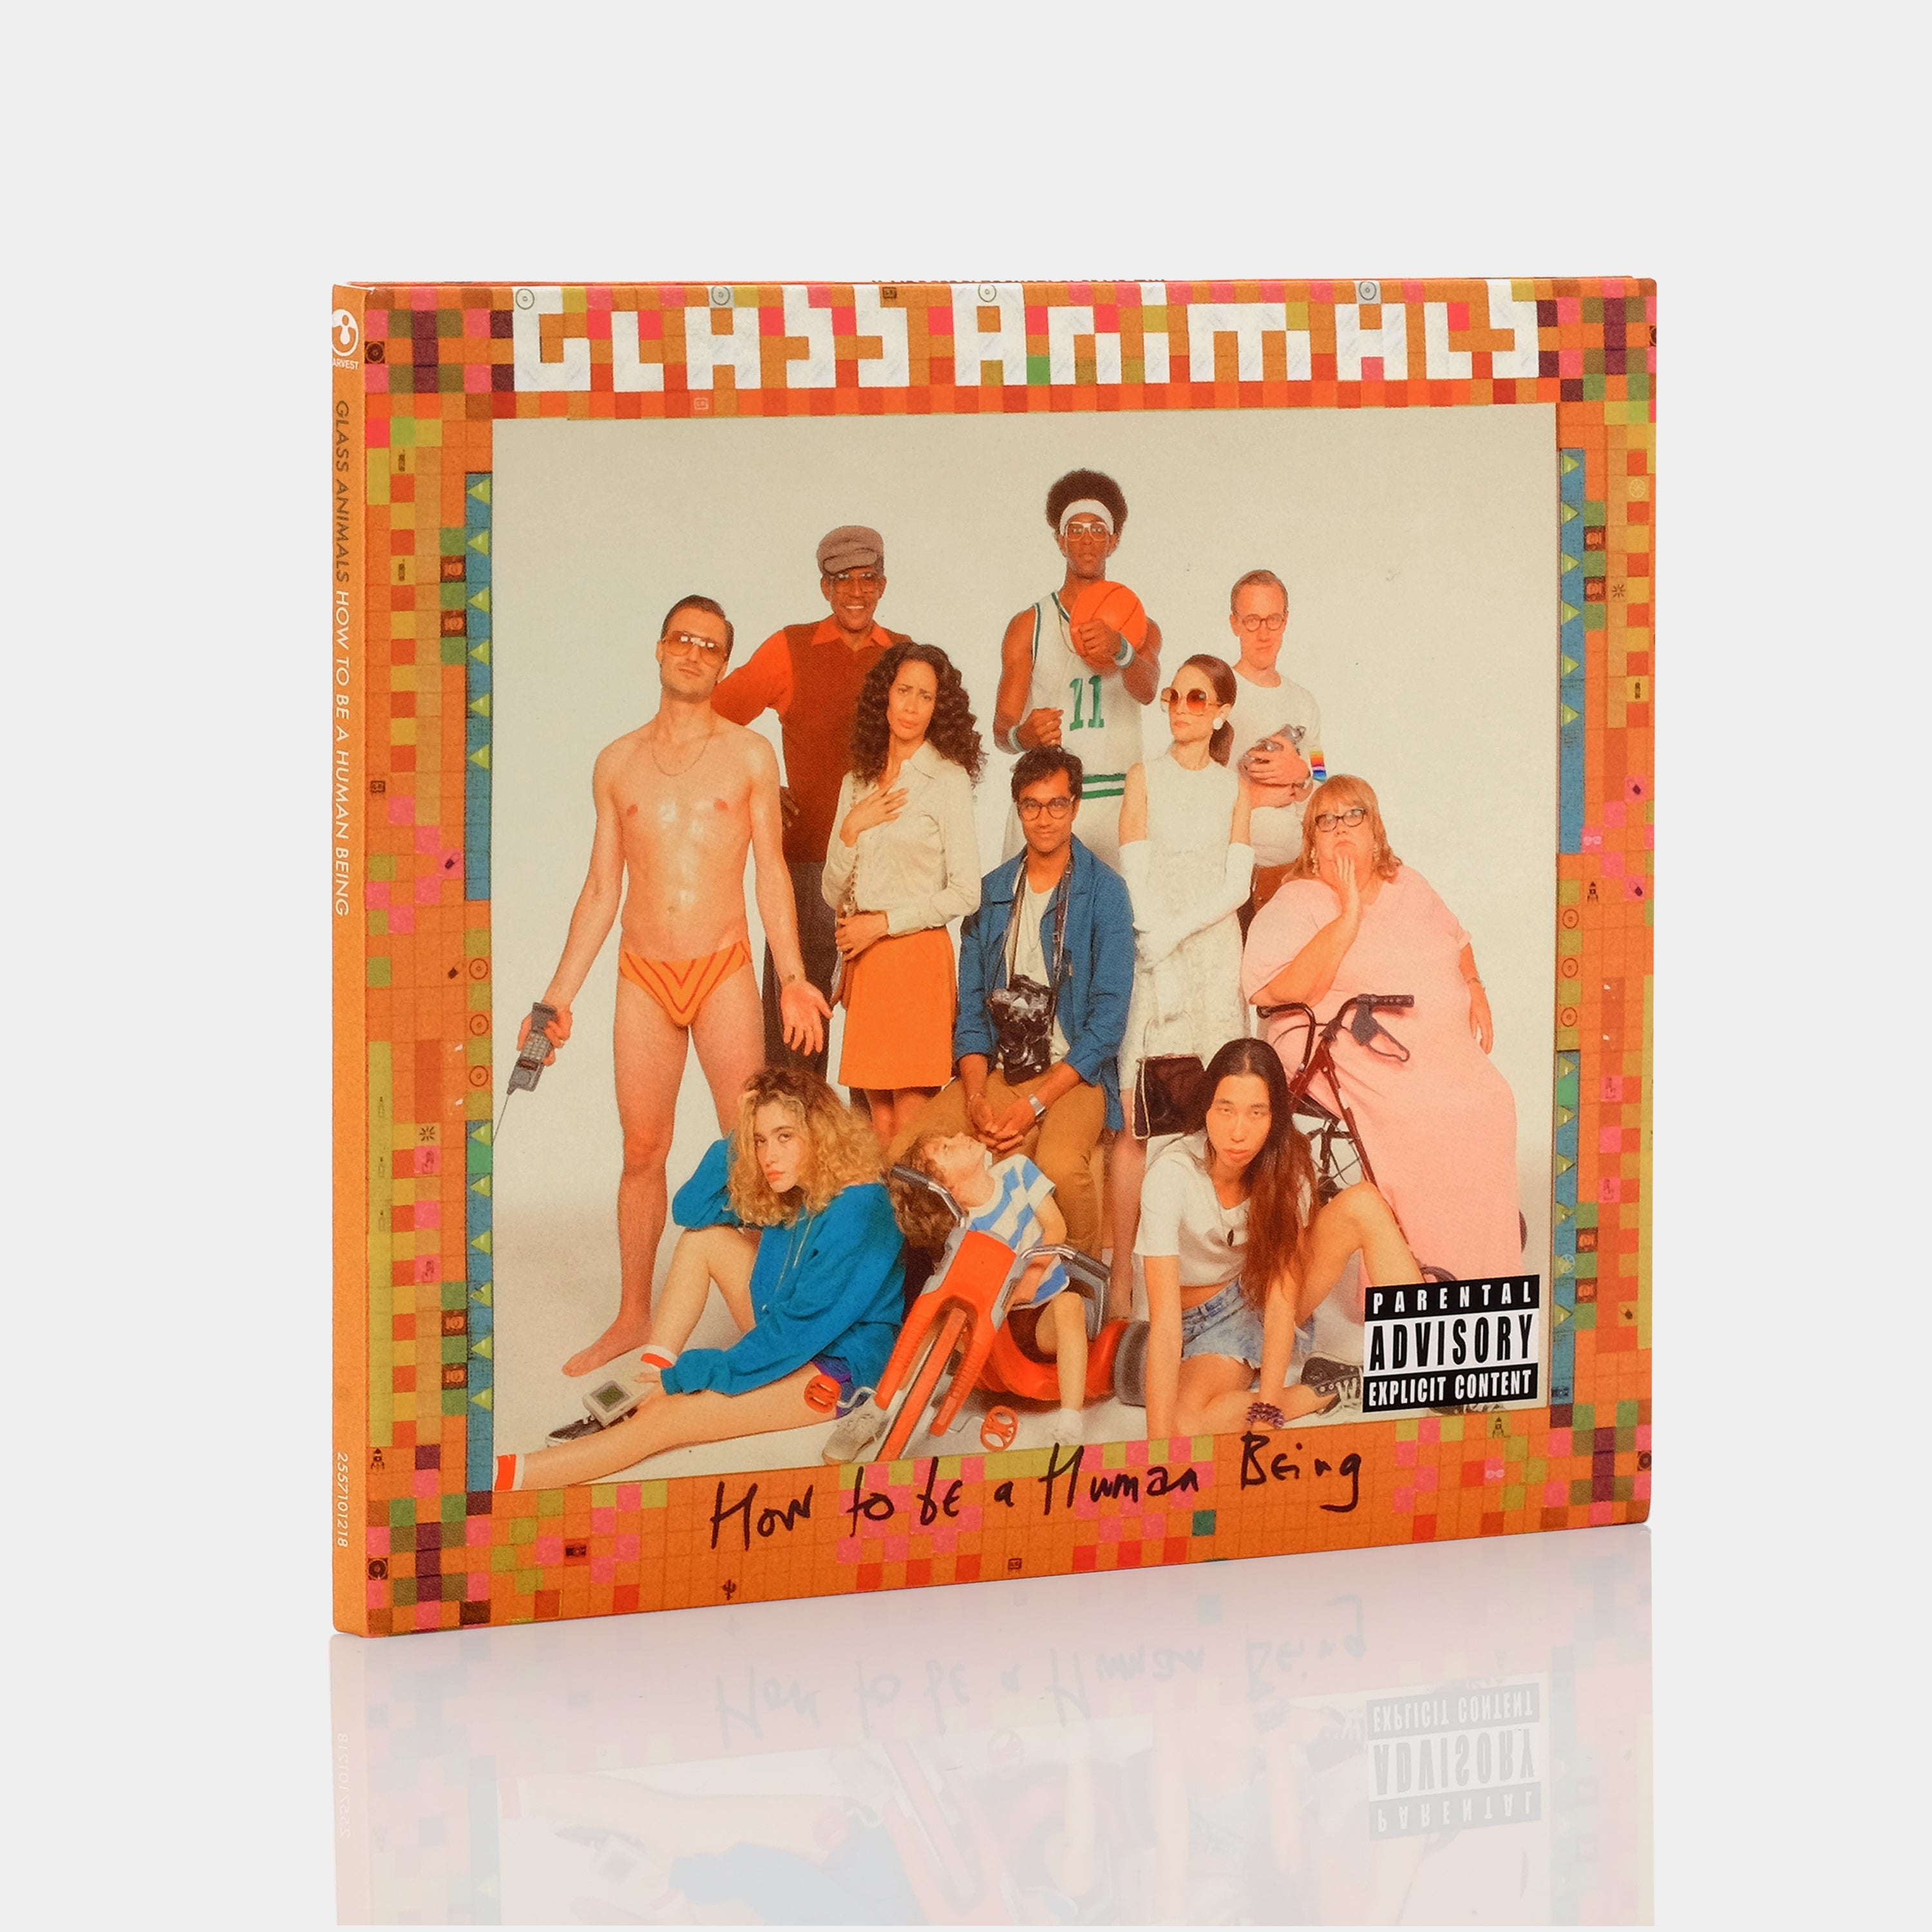 Glass Animals - How To Be A Human Being CD